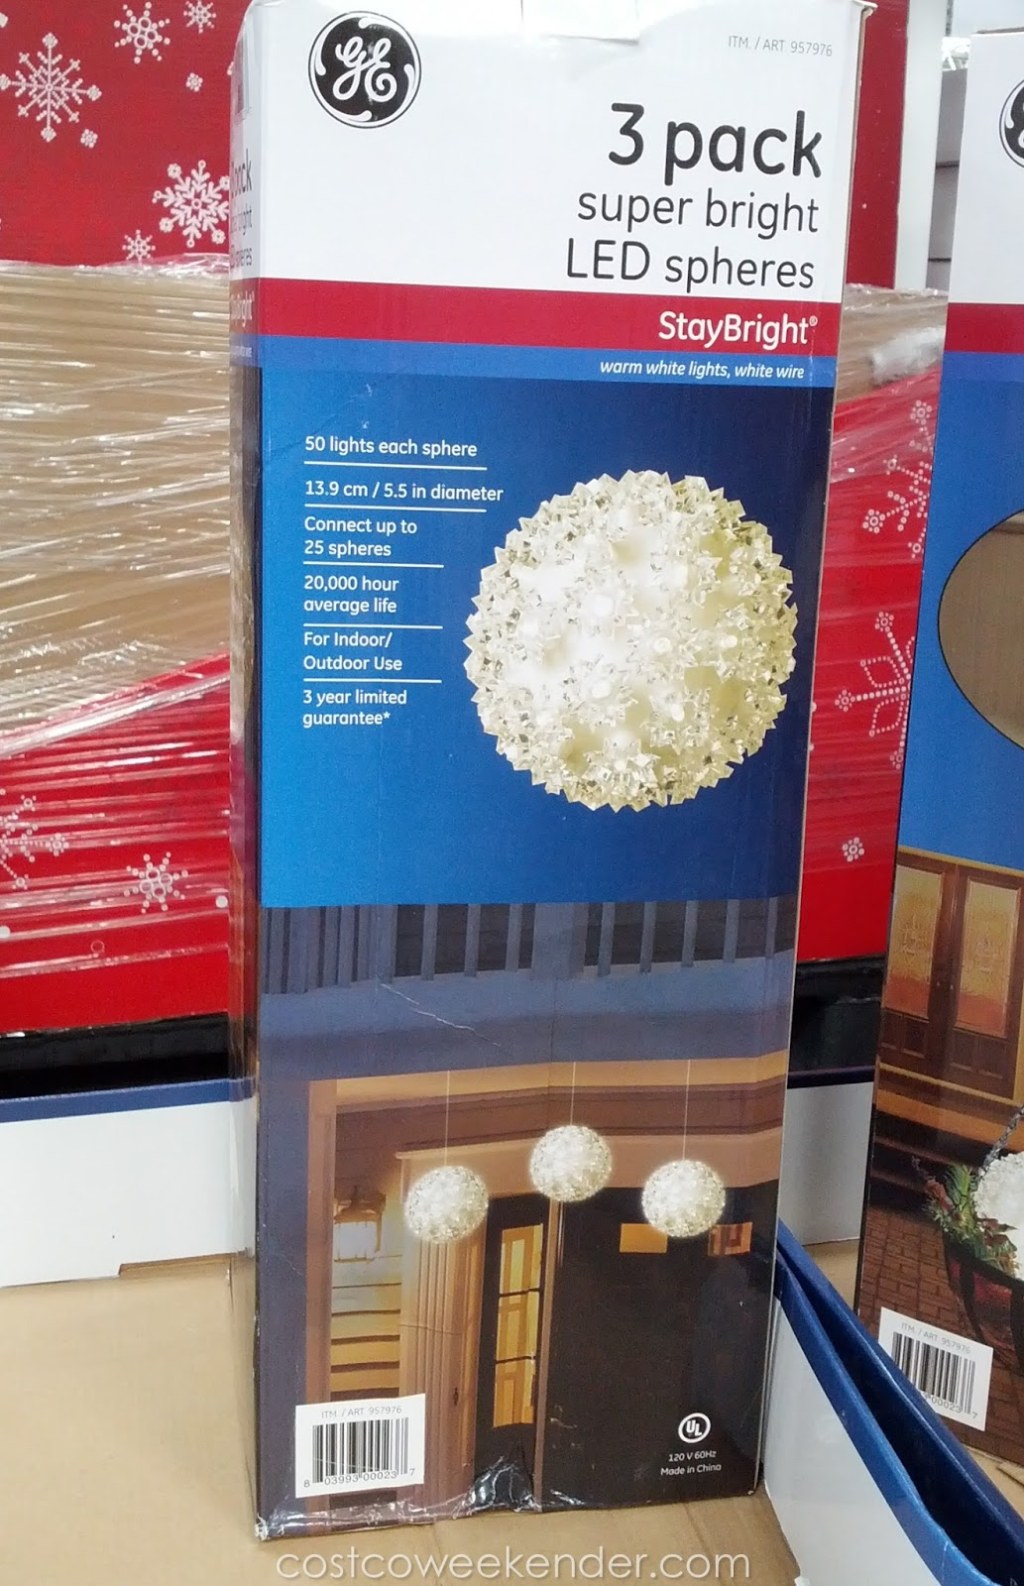 Picture of: GE Super Bright LED Spheres ( pack)  Costco Weekender